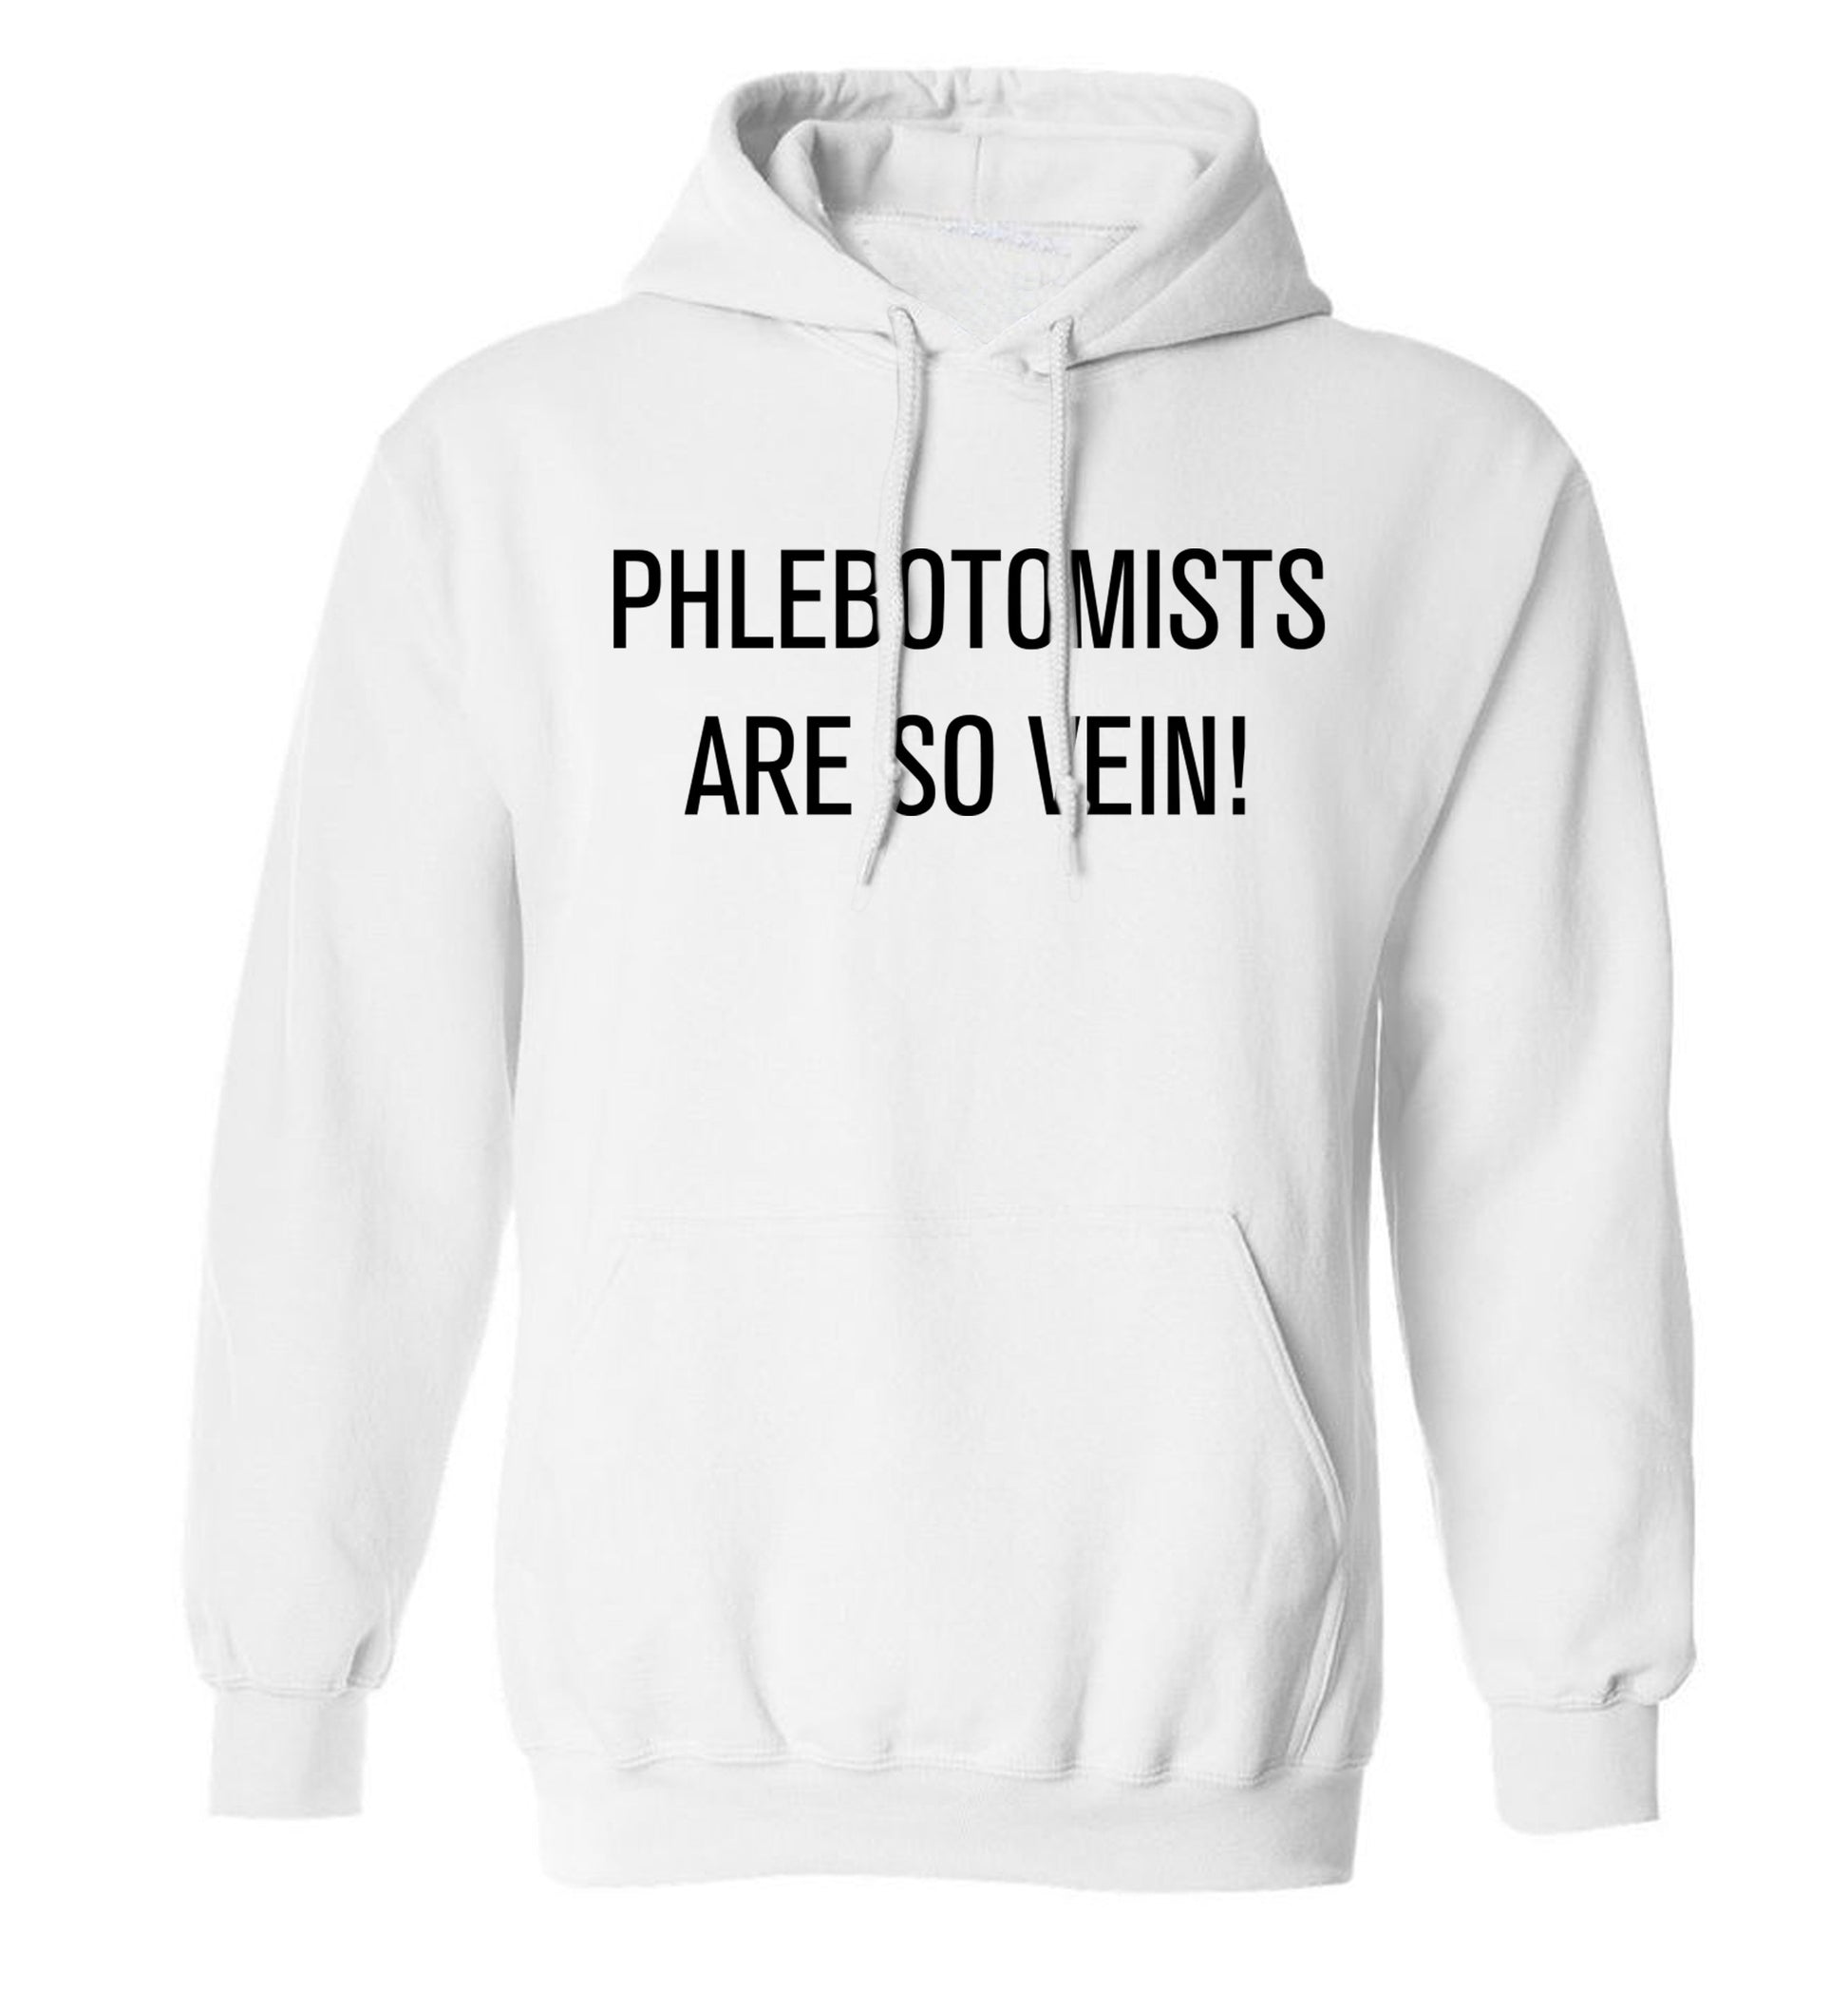 Phlebotomists are so vein! adults unisex white hoodie 2XL